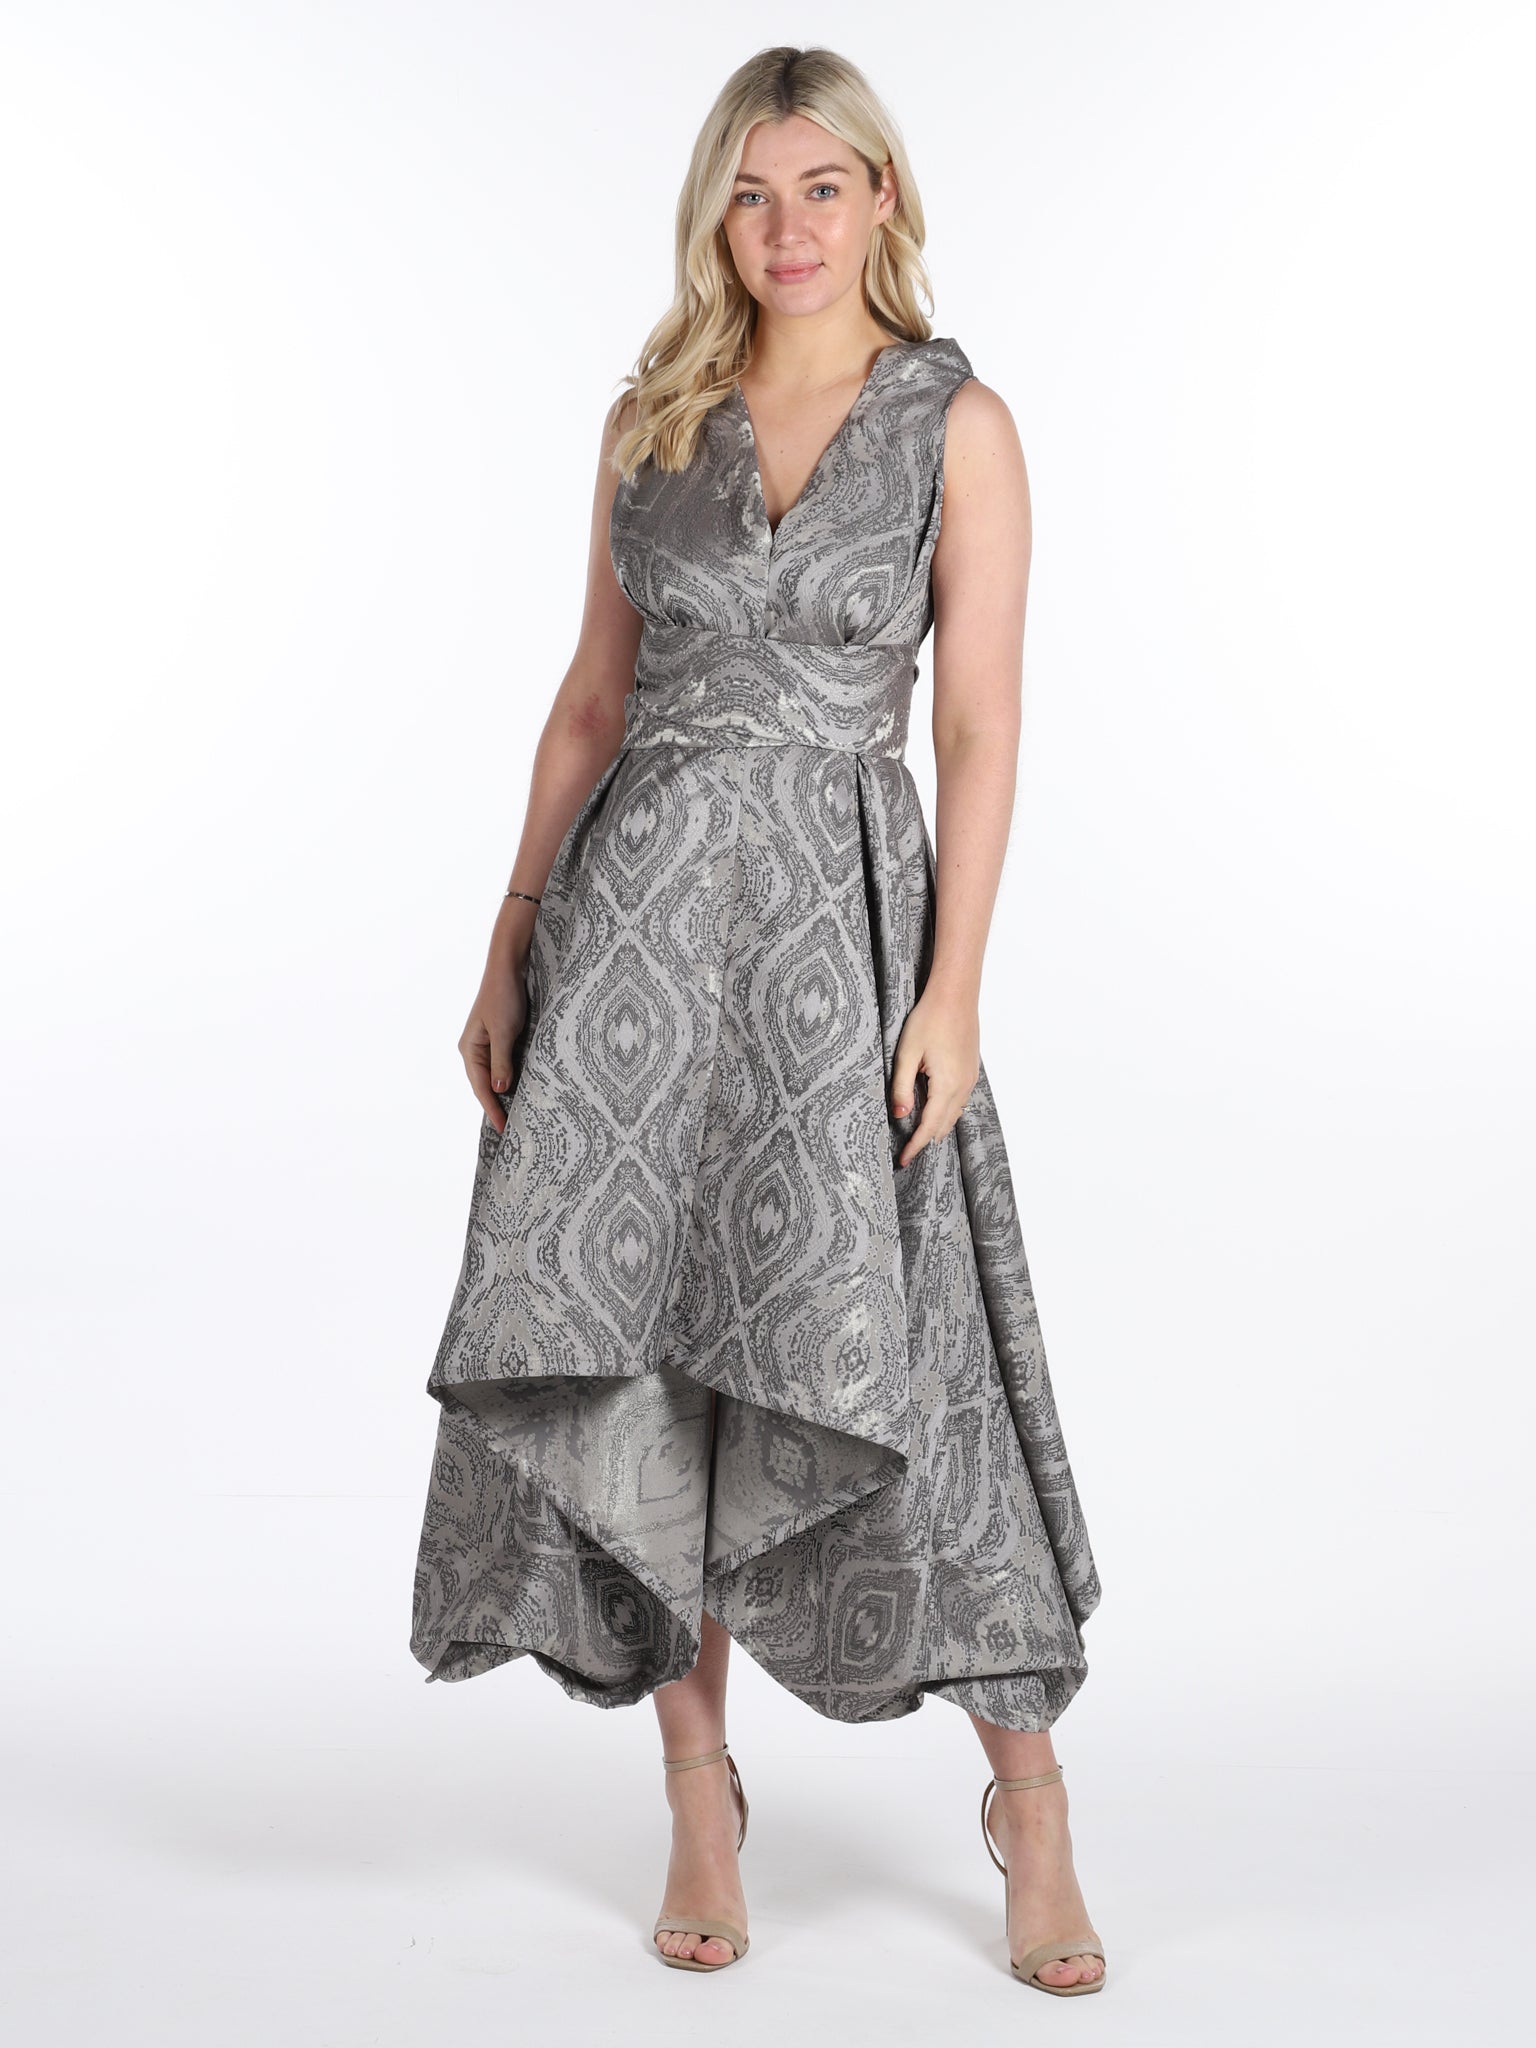 Shades of Silver Darcy Dress